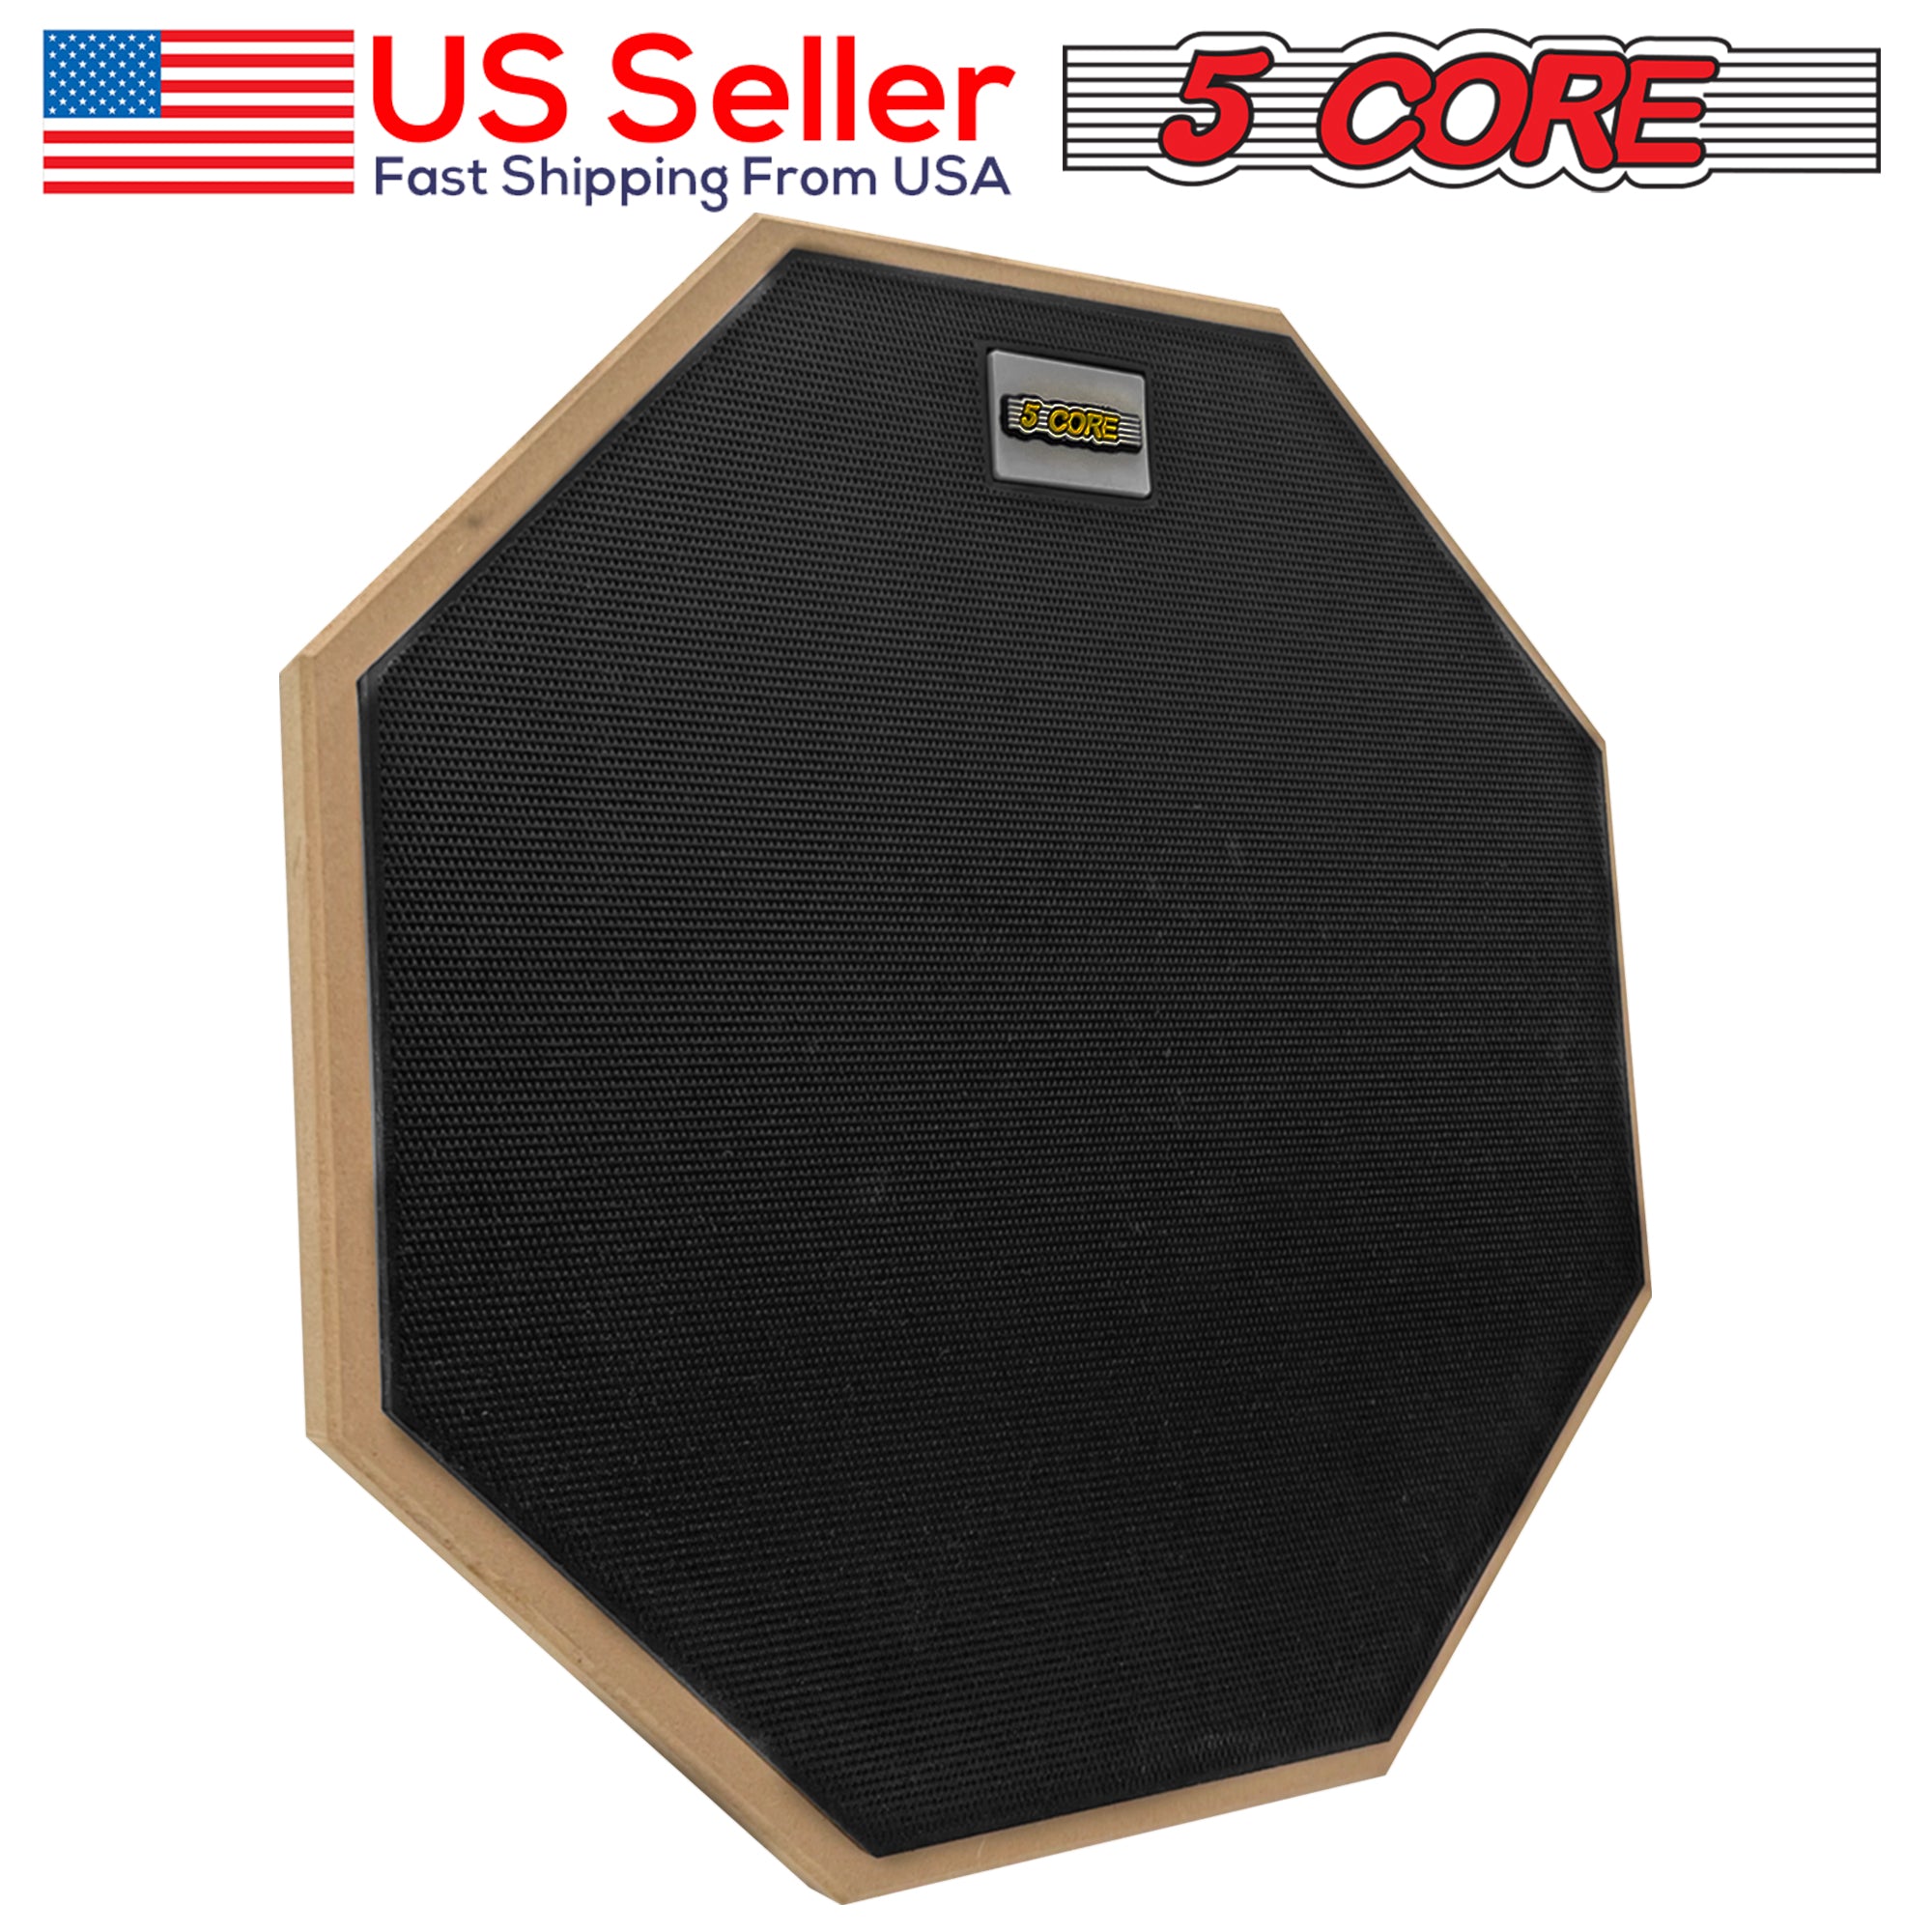 5 Core Drum Practice Pad Set • 12" Adjustable Snare Drumming Stand • Double Sided Silent Drummer Kit